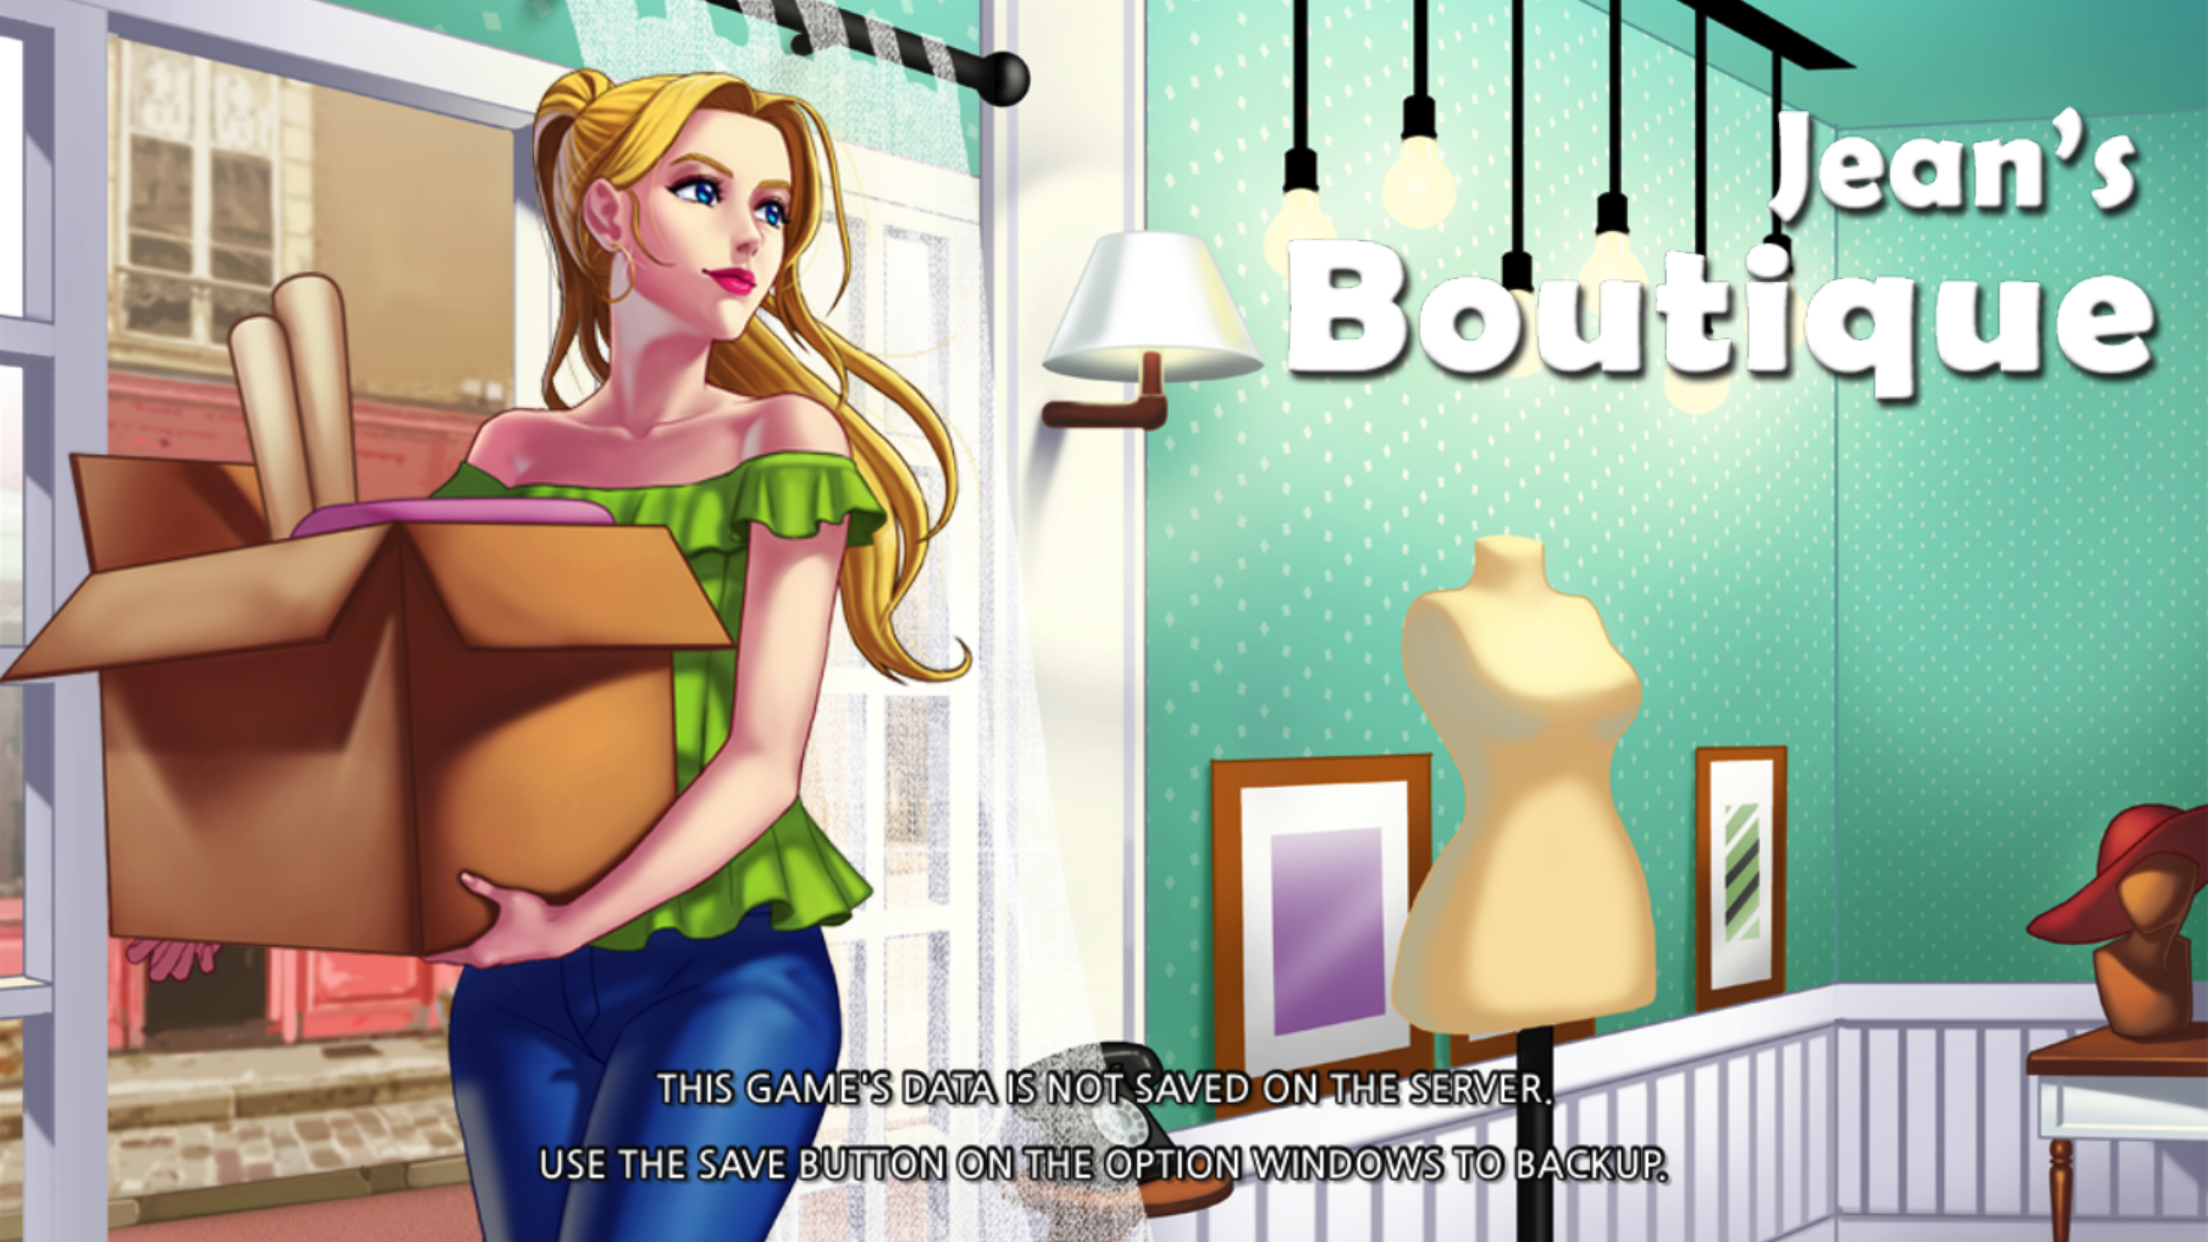 Banner of Jeans Boutique ၃ 1.0.41